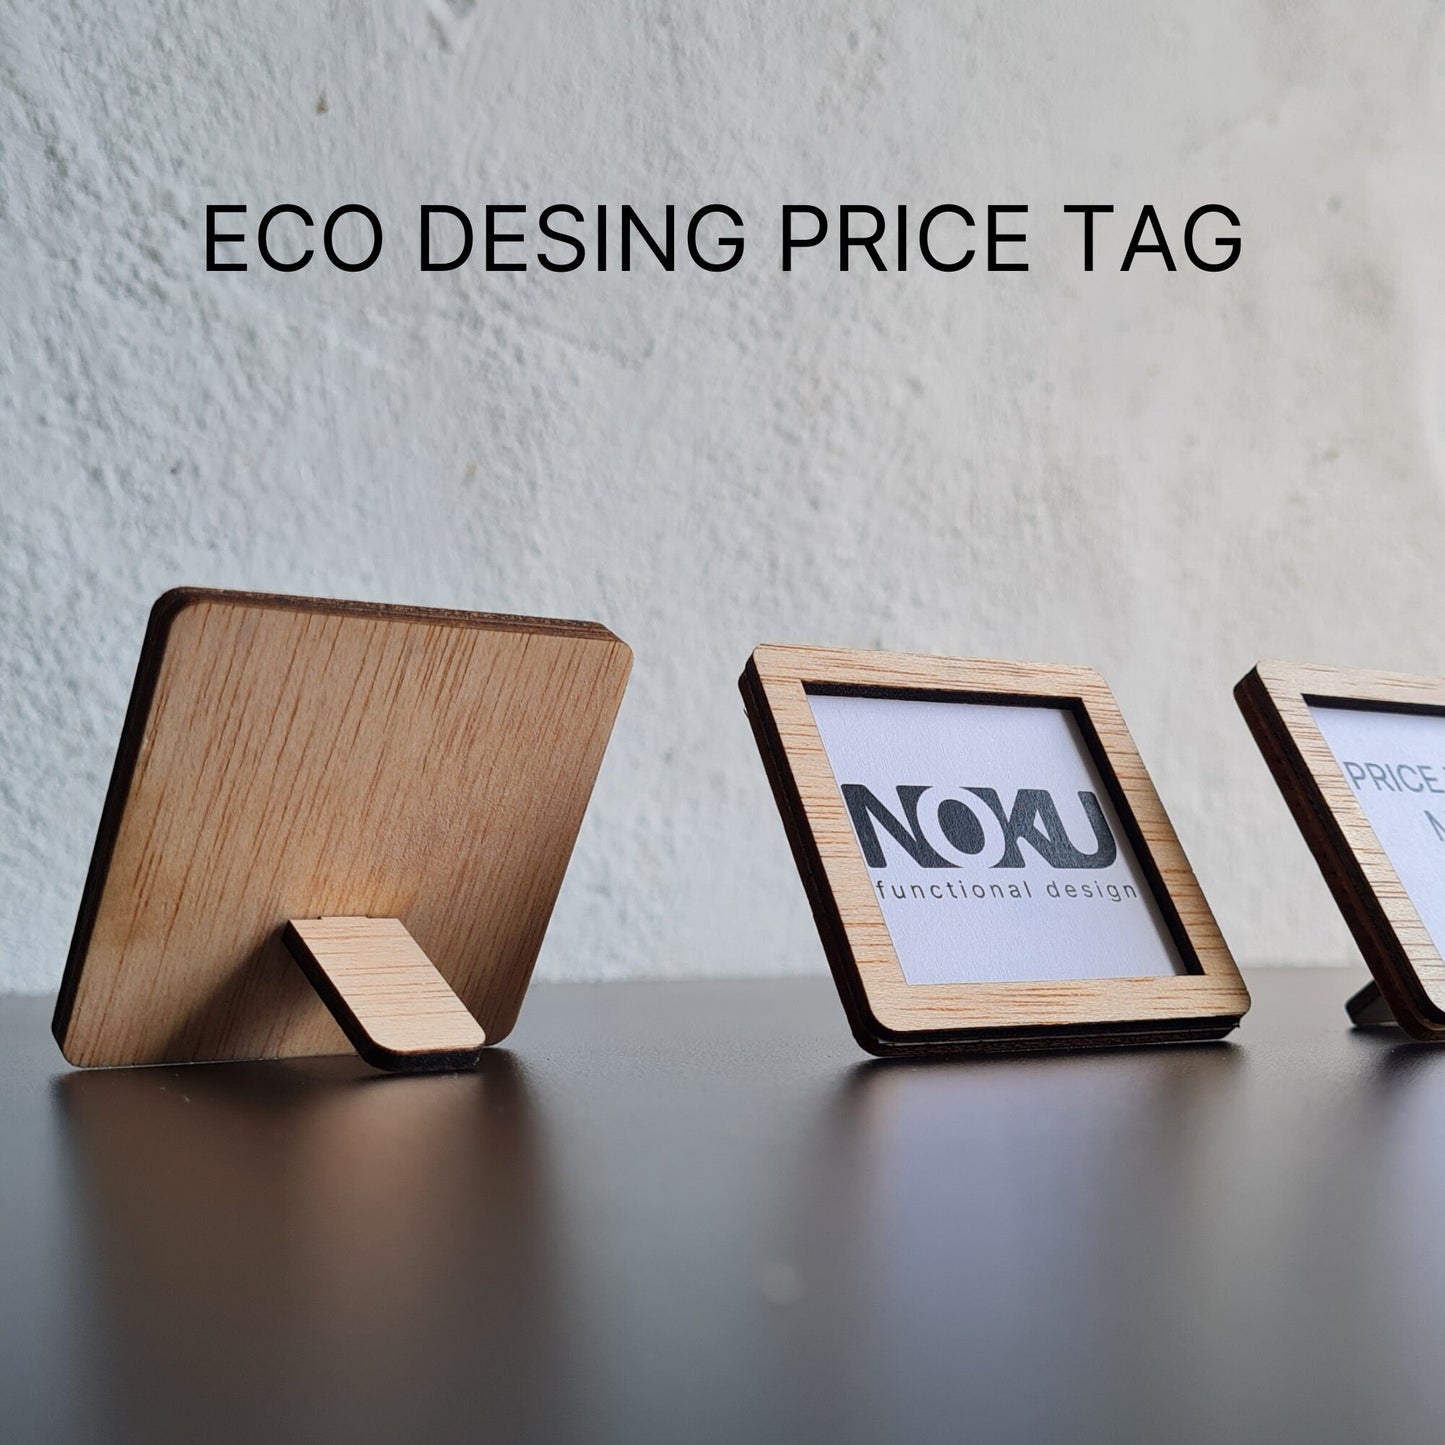 Set of Wooden Price Tags Square®